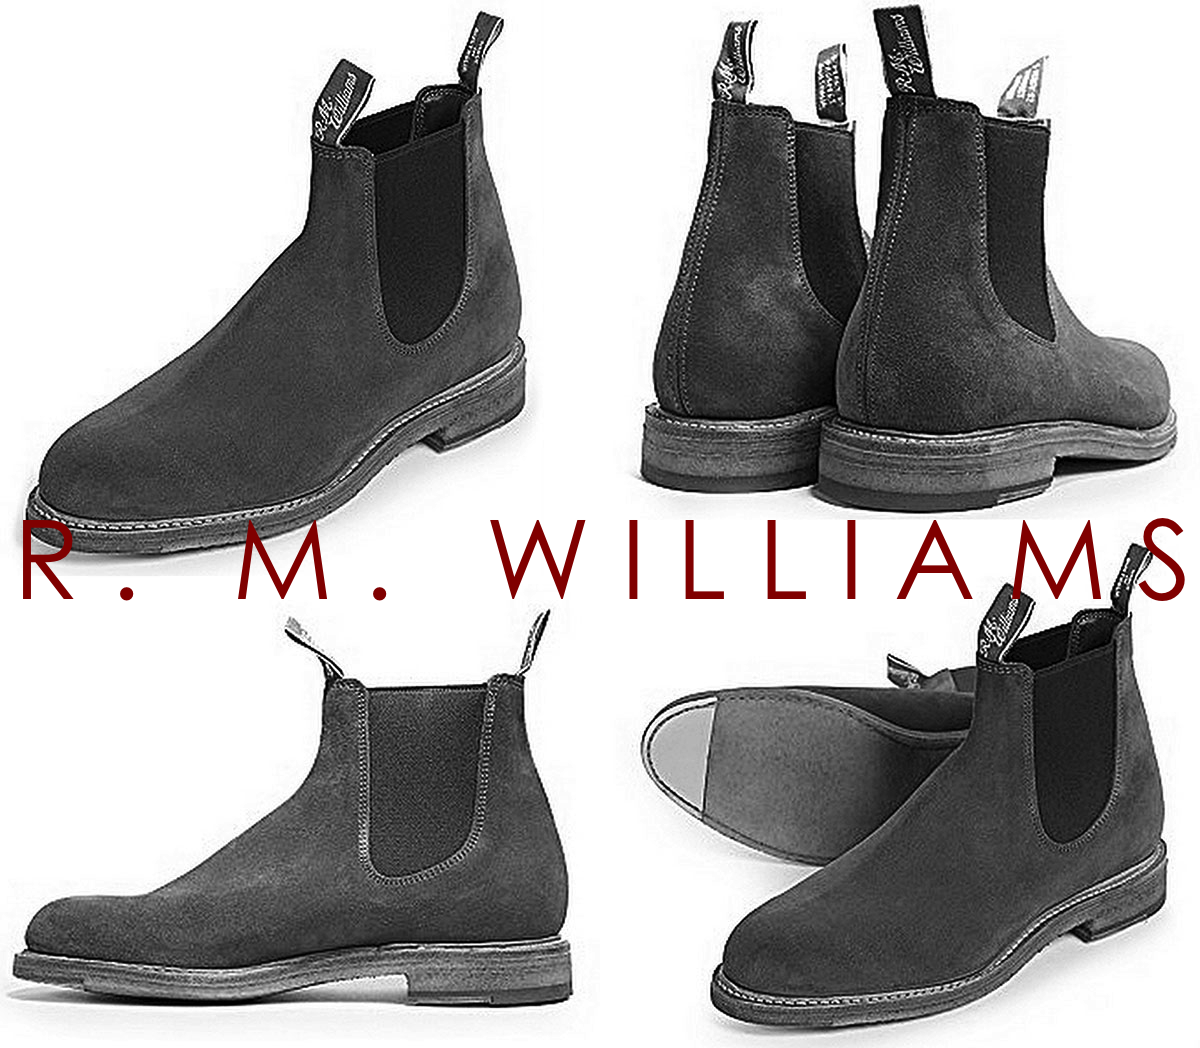 R.M. Williams Suede Chelsea Boots - Grey Boots, Shoes - WRMWS20450